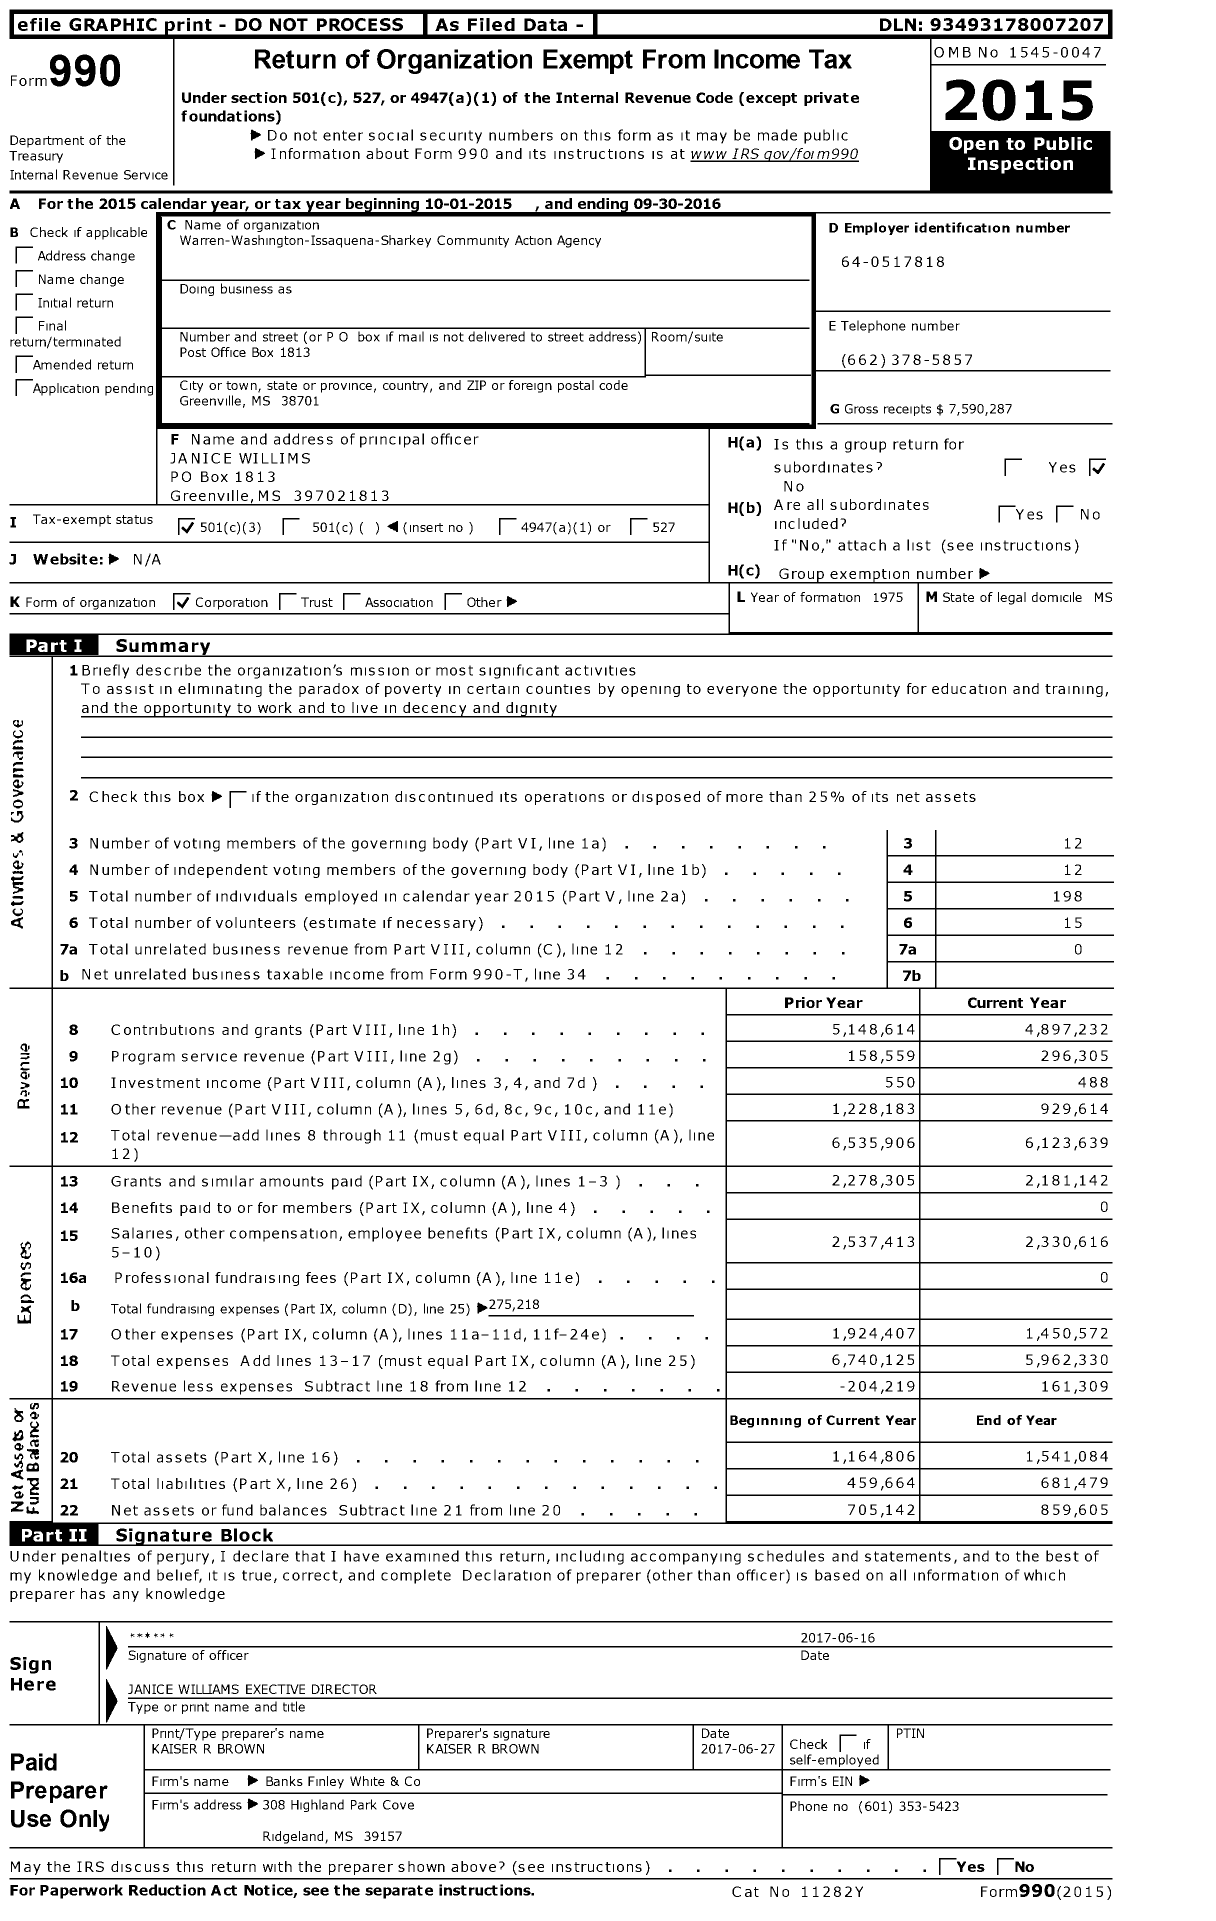 Image of first page of 2015 Form 990 for Warren-Washington-Issaquena-Sharkey Community Action Agency (WWISCAA)